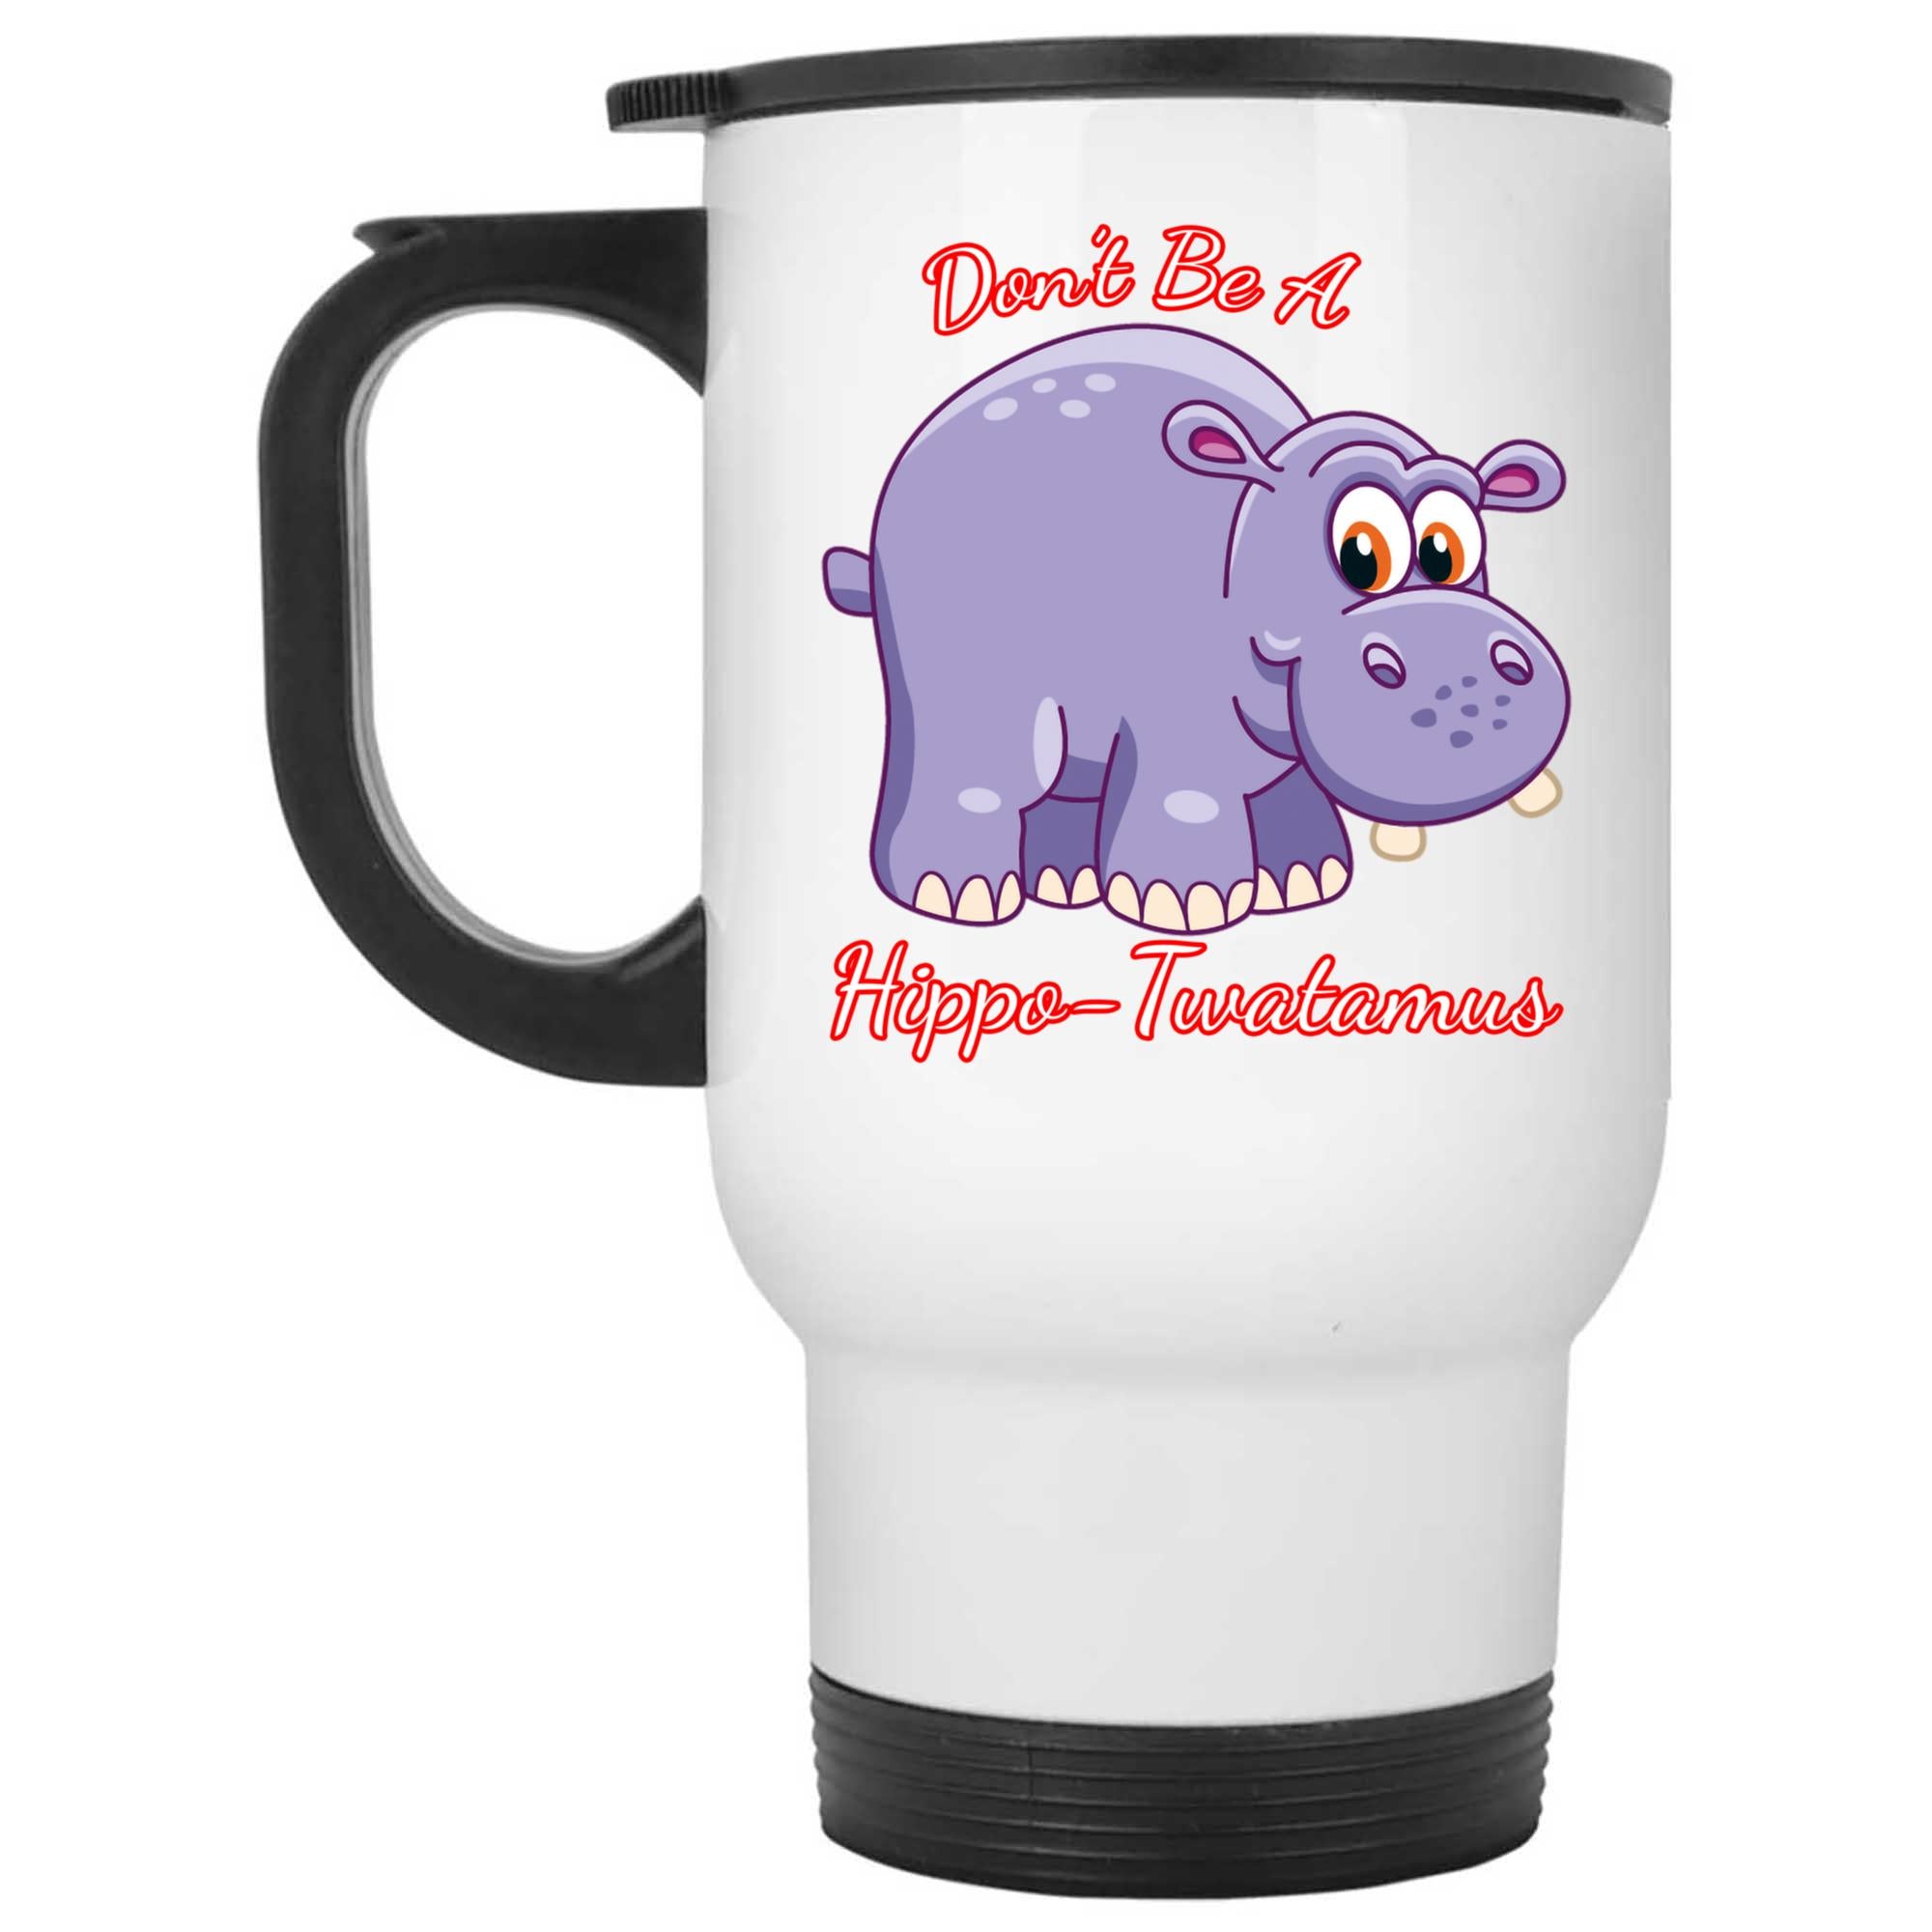 Skitongifts Funny Ceramic Coffee Mug For Birthday, Mother's Day, Father's Day, Christmas LH211221_Don't Be A Hippo 5Wt2T9C